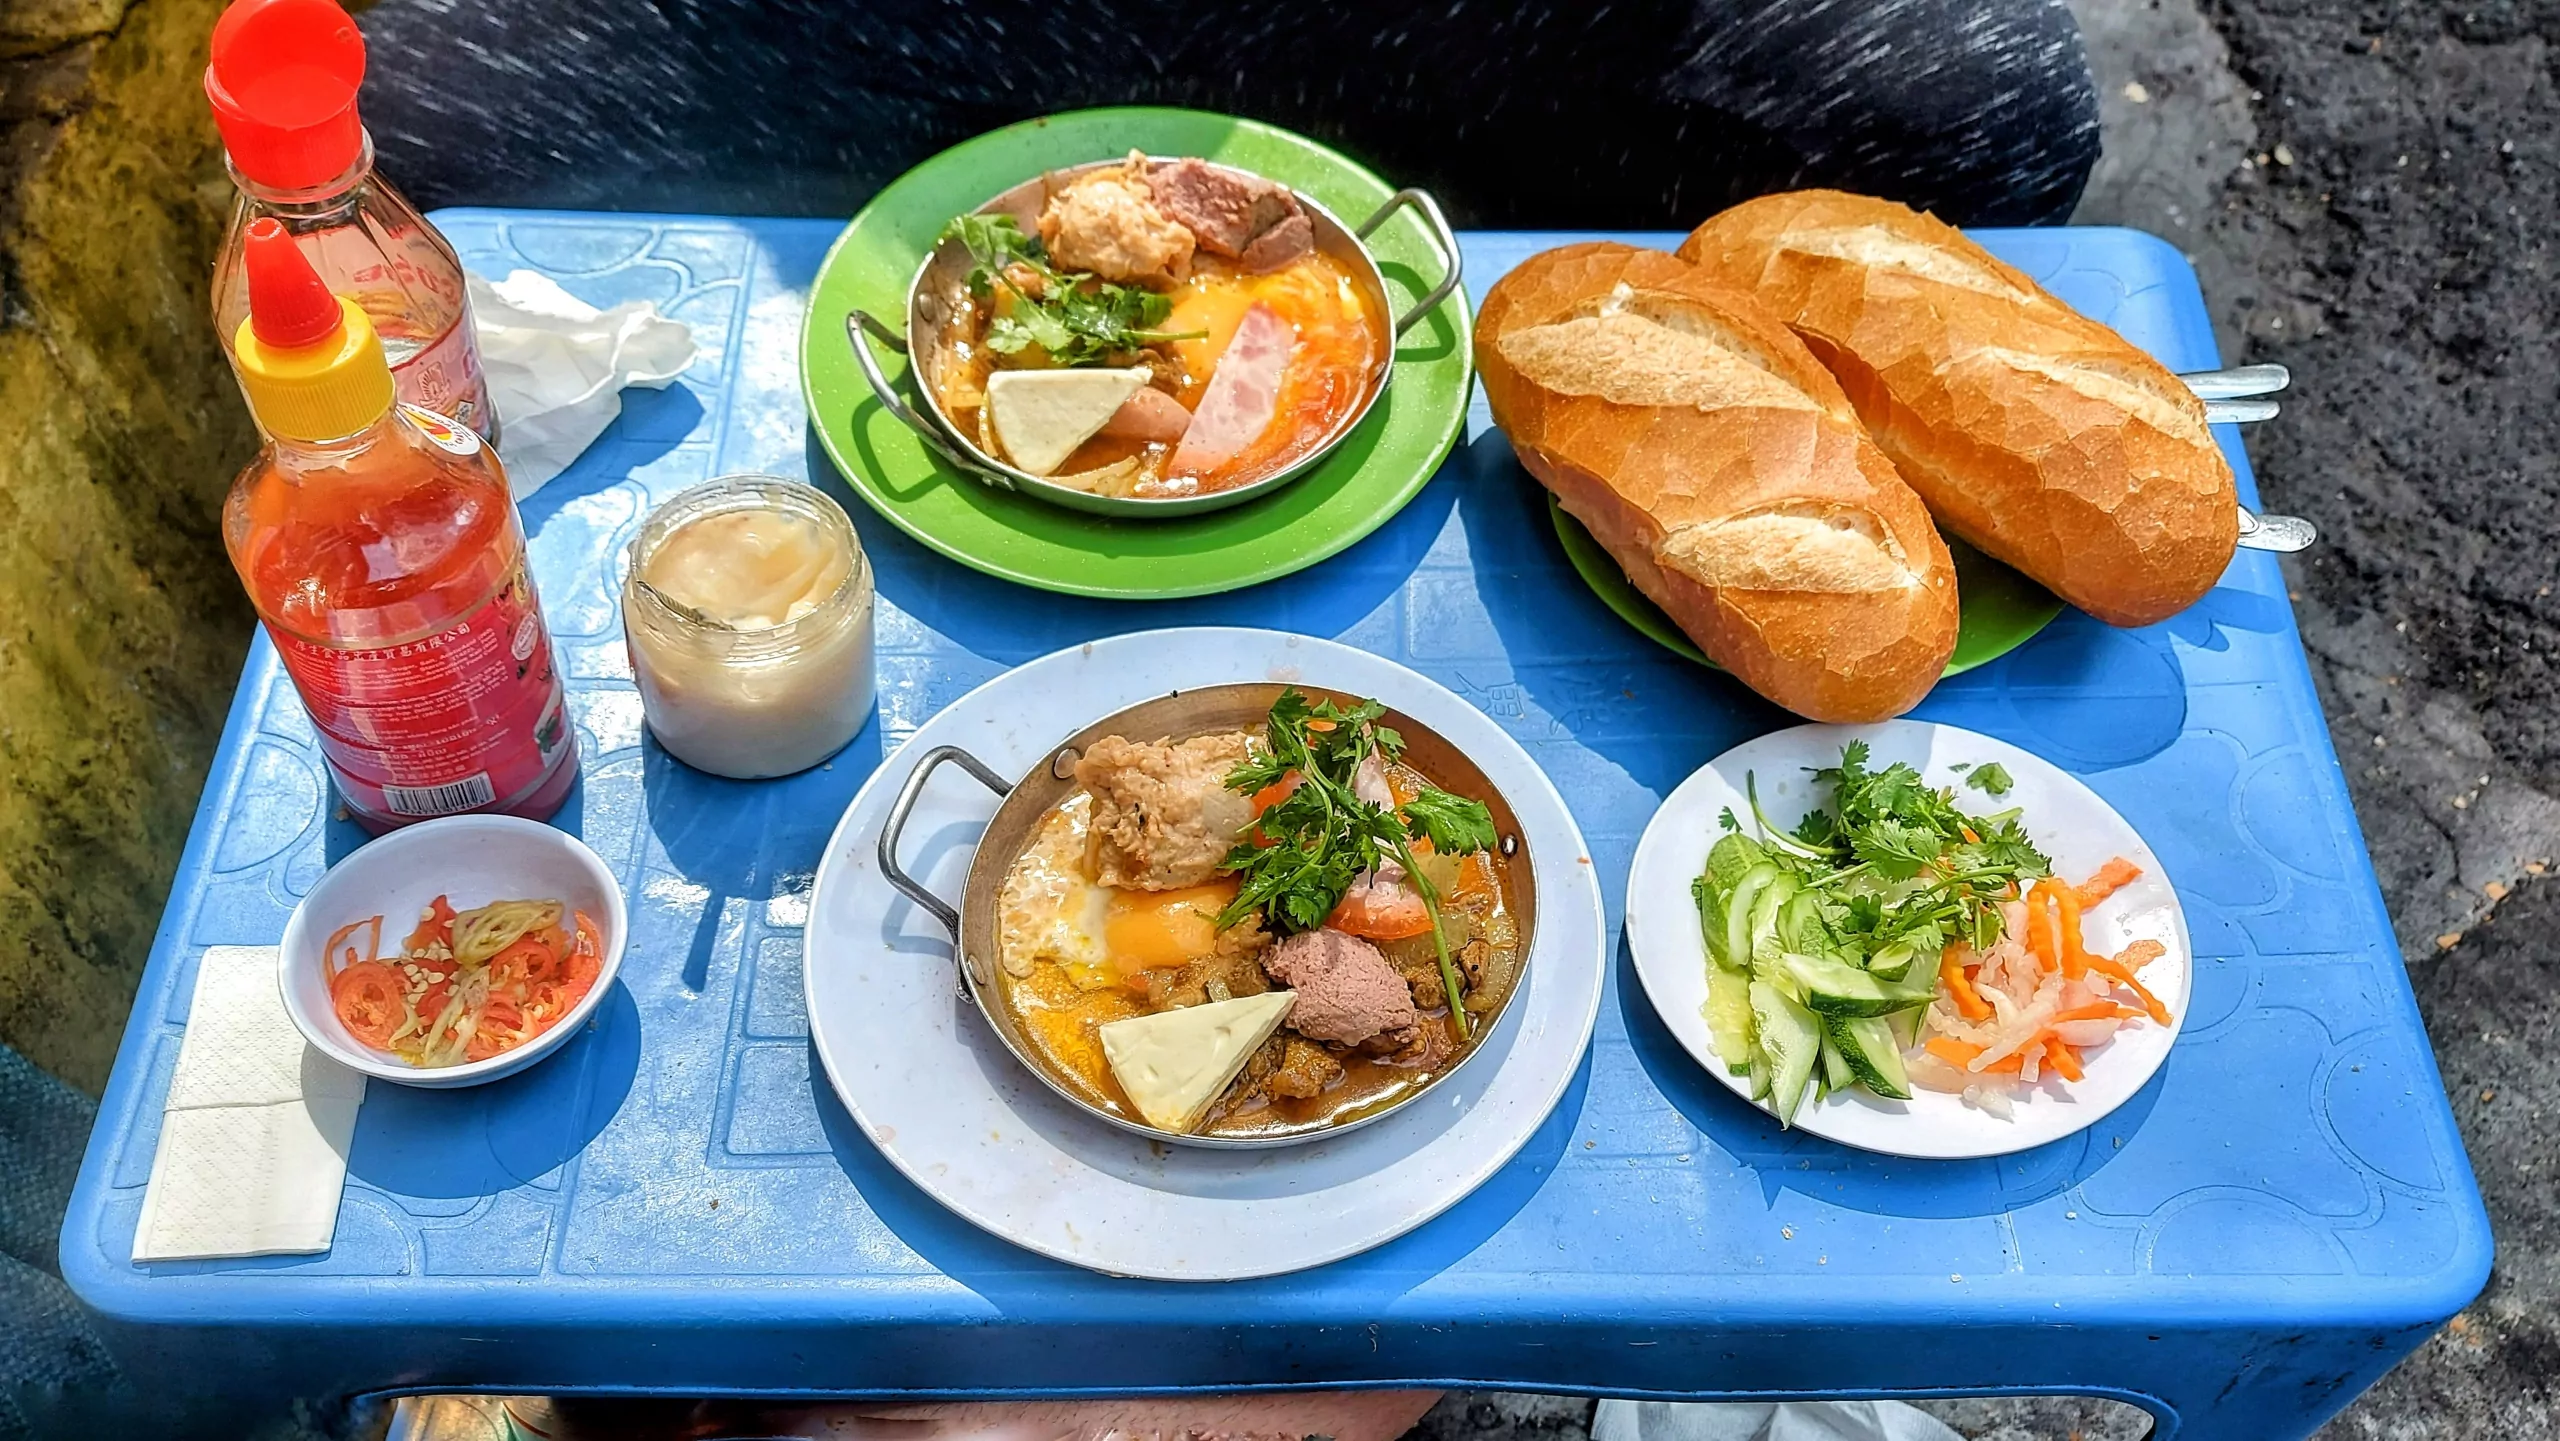 Bánh mì chảo, a classic and very hearty breakfast served in a hot pan with fried egg, cheese, sliced and spread sausages, various vegetables, and crispy bánh mì for topping and dipping. What a way to start a day. Price: 50,000 VNĐ (≈1.99 EUR).